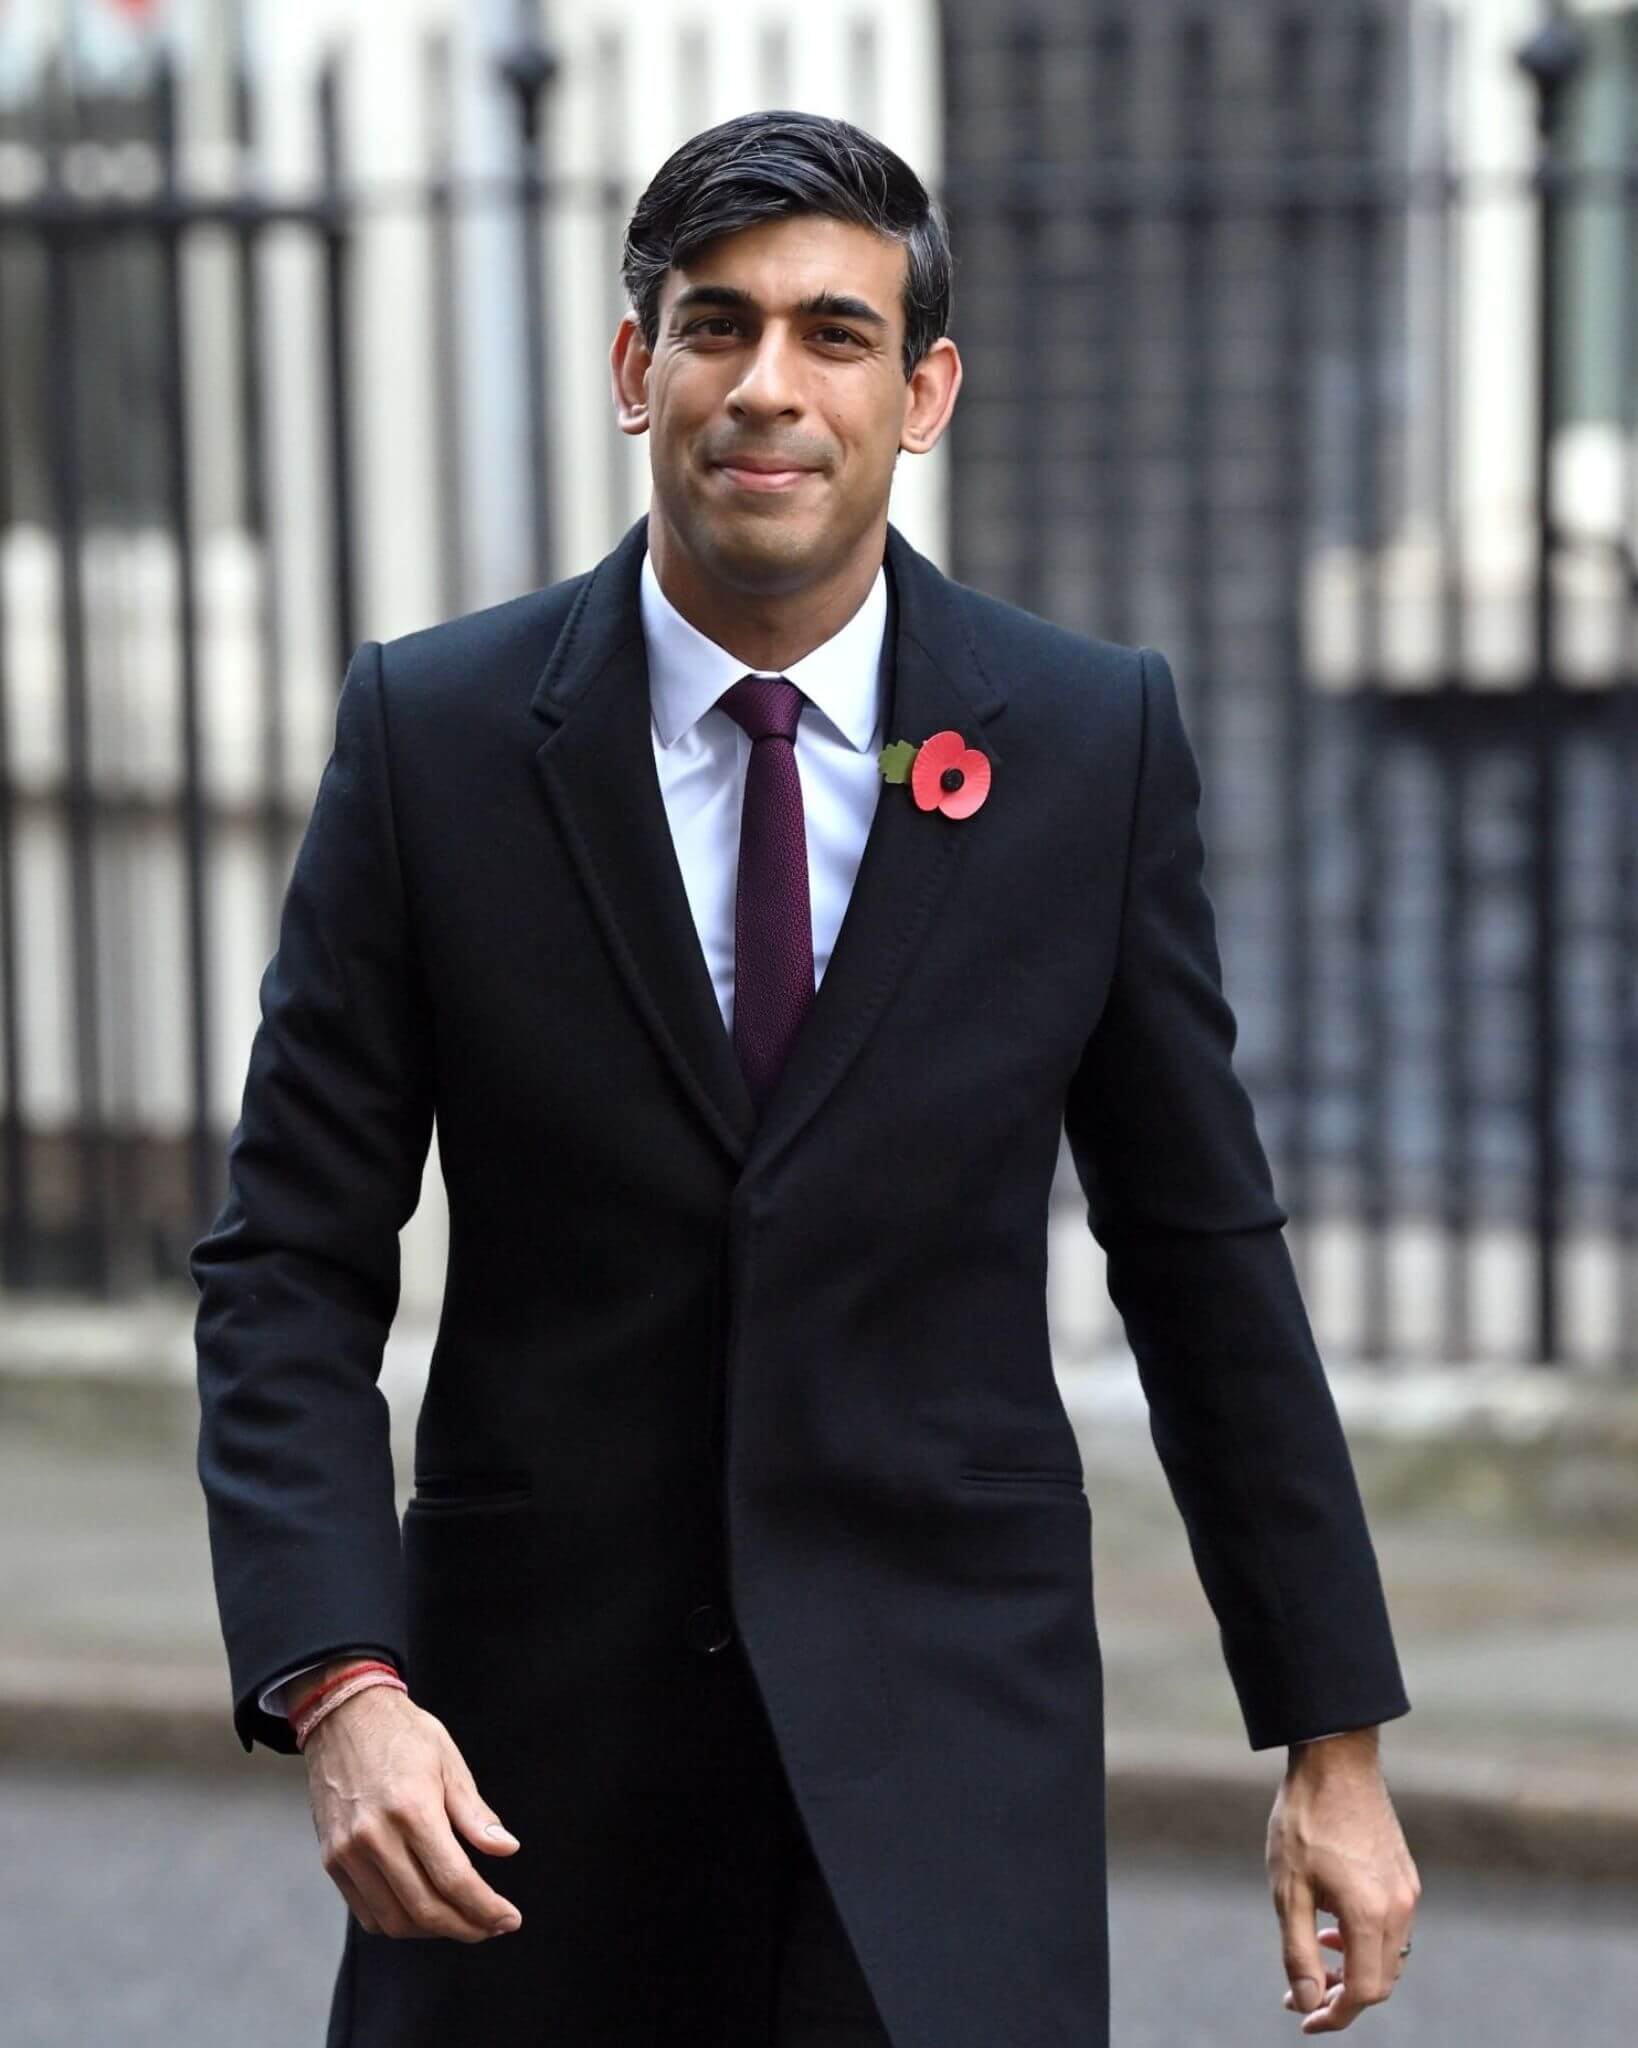 Rishi Sunak Net Worth: How Rich Is UK Prime Minister Candidate?